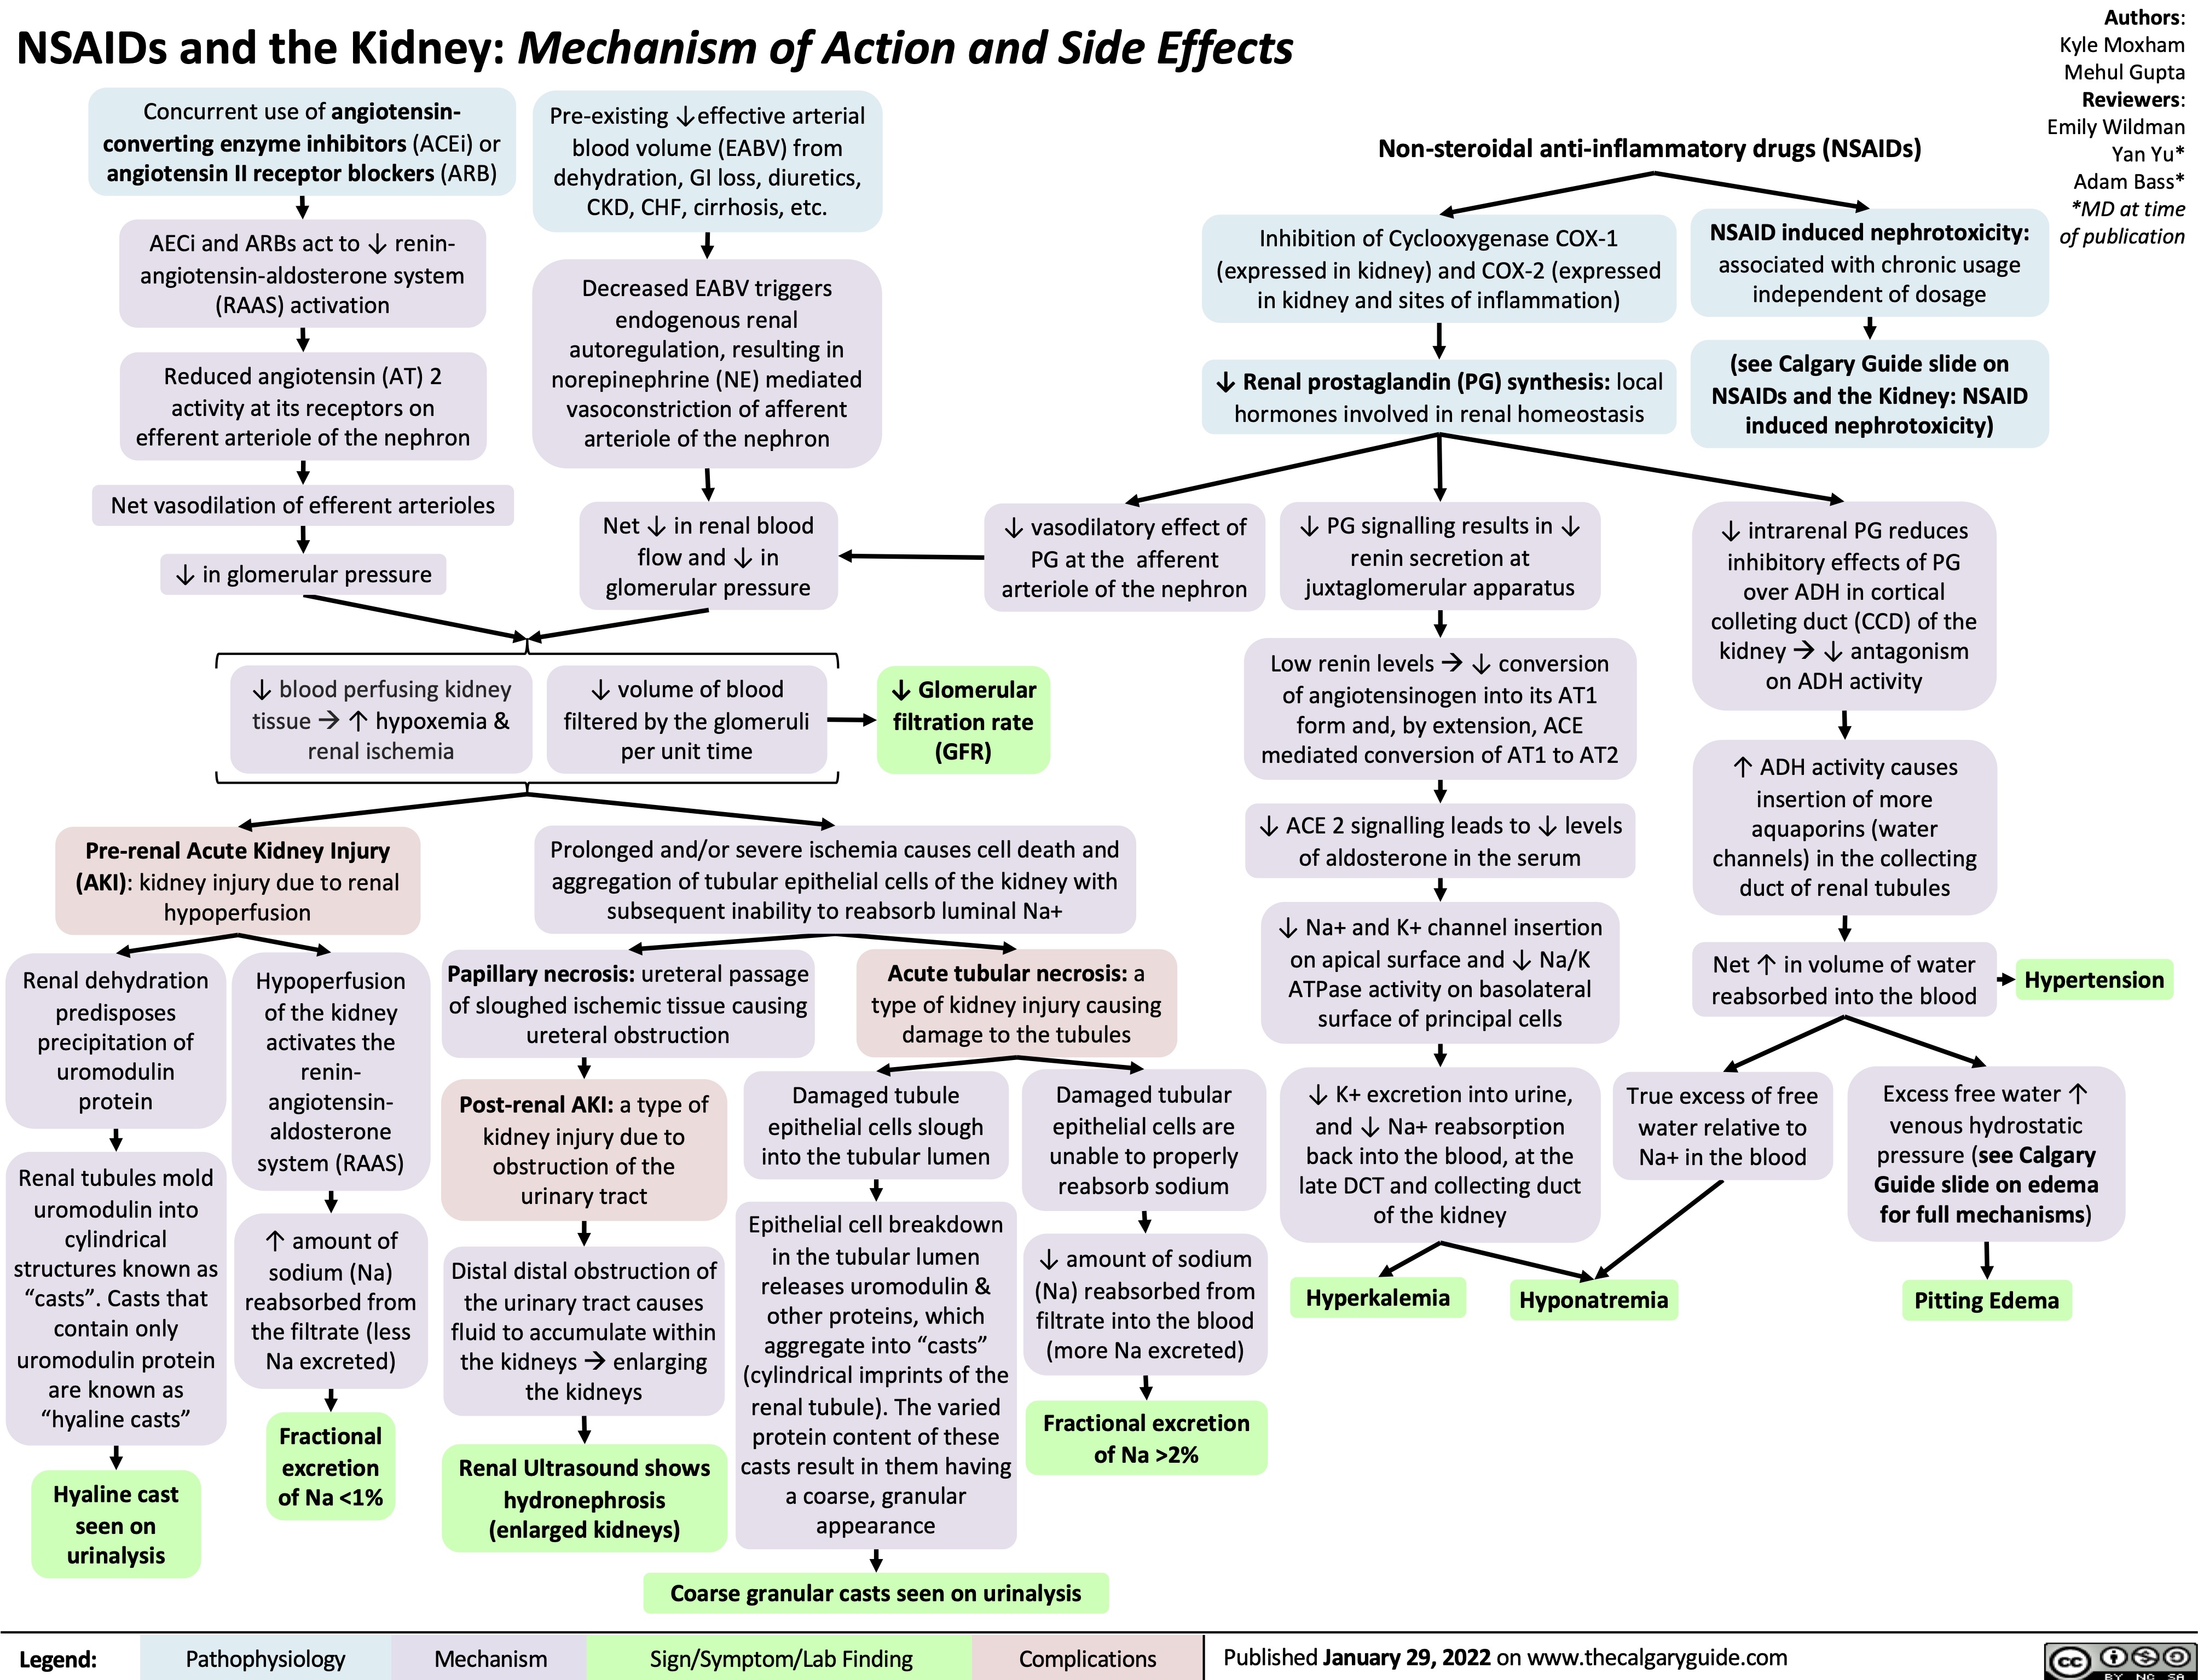 NSAIDs and the Kidney: Mechanism of Action and Side Effects
Authors: Kyle Moxham Mehul Gupta Reviewers: Emily Wildman Yan Yu* Adam Bass* *MD at time of publication
  Concurrent use of angiotensin- converting enzyme inhibitors (ACEi) or angiotensin II receptor blockers (ARB)
AECi and ARBs act to ↓ renin- angiotensin-aldosterone system (RAAS) activation
Reduced angiotensin (AT) 2 activity at its receptors on efferent arteriole of the nephron
Net vasodilation of efferent arterioles ↓ in glomerular pressure
↓ blood perfusing kidney tissueà↑ hypoxemia & renal ischemia
Pre-existing ↓effective arterial blood volume (EABV) from
dehydration, GI loss, diuretics, CKD, CHF, cirrhosis, etc.
Decreased EABV triggers endogenous renal autoregulation, resulting in norepinephrine (NE) mediated vasoconstriction of afferent arteriole of the nephron
Net ↓ in renal blood flow and ↓ in glomerular pressure
↓ volume of blood filtered by the glomeruli per unit time
Non-steroidal anti-inflammatory drugs (NSAIDs)
     Inhibition of Cyclooxygenase COX-1 (expressed in kidney) and COX-2 (expressed in kidney and sites of inflammation)
↓ Renal prostaglandin (PG) synthesis: local hormones involved in renal homeostasis
NSAID induced nephrotoxicity:
associated with chronic usage independent of dosage
(see Calgary Guide slide on NSAIDs and the Kidney: NSAID induced nephrotoxicity)
↓ intrarenal PG reduces inhibitory effects of PG over ADH in cortical colleting duct (CCD) of the kidneyà↓ antagonism on ADH activity
↑ ADH activity causes insertion of more
aquaporins (water channels) in the collecting duct of renal tubules
Net ↑ in volume of water reabsorbed into the blood
           ↓ vasodilatory effect of PG at the afferent arteriole of the nephron
↓ Glomerular filtration rate (GFR)
↓ PG signalling results in ↓ renin secretion at juxtaglomerular apparatus
Low renin levelsà↓ conversion of angiotensinogen into its AT1 form and, by extension, ACE mediated conversion of AT1 to AT2
↓ ACE 2 signalling leads to ↓ levels of aldosterone in the serum
↓ Na+ and K+ channel insertion on apical surface and ↓ Na/K ATPase activity on basolateral surface of principal cells
↓ K+ excretion into urine, and ↓ Na+ reabsorption
back into the blood, at the late DCT and collecting duct of the kidney
               Pre-renal Acute Kidney Injury (AKI): kidney injury due to renal hypoperfusion
Prolonged and/or severe ischemia causes cell death and aggregation of tubular epithelial cells of the kidney with subsequent inability to reabsorb luminal Na+
          Renal dehydration predisposes
precipitation of uromodulin protein
Renal tubules mold uromodulin into cylindrical structures known as “casts”. Casts that contain only uromodulin protein are known as “hyaline casts”
Hyaline cast seen on urinalysis
Hypoperfusion of the kidney activates the renin- angiotensin- aldosterone system (RAAS)
↑ amount of sodium (Na) reabsorbed from the filtrate (less Na excreted)
Fractional excretion of Na <1%
Papillary necrosis: ureteral passage of sloughed ischemic tissue causing ureteral obstruction
Acute tubular necrosis: a type of kidney injury causing damage to the tubules
Hypertension
        Post-renal AKI: a type of kidney injury due to
obstruction of the urinary tract
Distal distal obstruction of the urinary tract causes fluid to accumulate within the kidneysàenlarging the kidneys
Renal Ultrasound shows hydronephrosis (enlarged kidneys)
Damaged tubule epithelial cells slough into the tubular lumen
Epithelial cell breakdown in the tubular lumen
releases uromodulin & other proteins, which aggregate into “casts” (cylindrical imprints of the renal tubule). The varied protein content of these casts result in them having a coarse, granular appearance
Damaged tubular epithelial cells are unable to properly reabsorb sodium
↓ amount of sodium (Na) reabsorbed from filtrate into the blood (more Na excreted)
Fractional excretion of Na >2%
True excess of free water relative to Na+ in the blood
Excess free water ↑ venous hydrostatic pressure (see Calgary Guide slide on edema for full mechanisms)
Pitting Edema
          Hyperkalemia
Hyponatremia
     Coarse granular casts seen on urinalysis
 Legend:
 Pathophysiology
Mechanism
Sign/Symptom/Lab Finding
 Complications
Published January 29, 2022 on www.thecalgaryguide.com
    